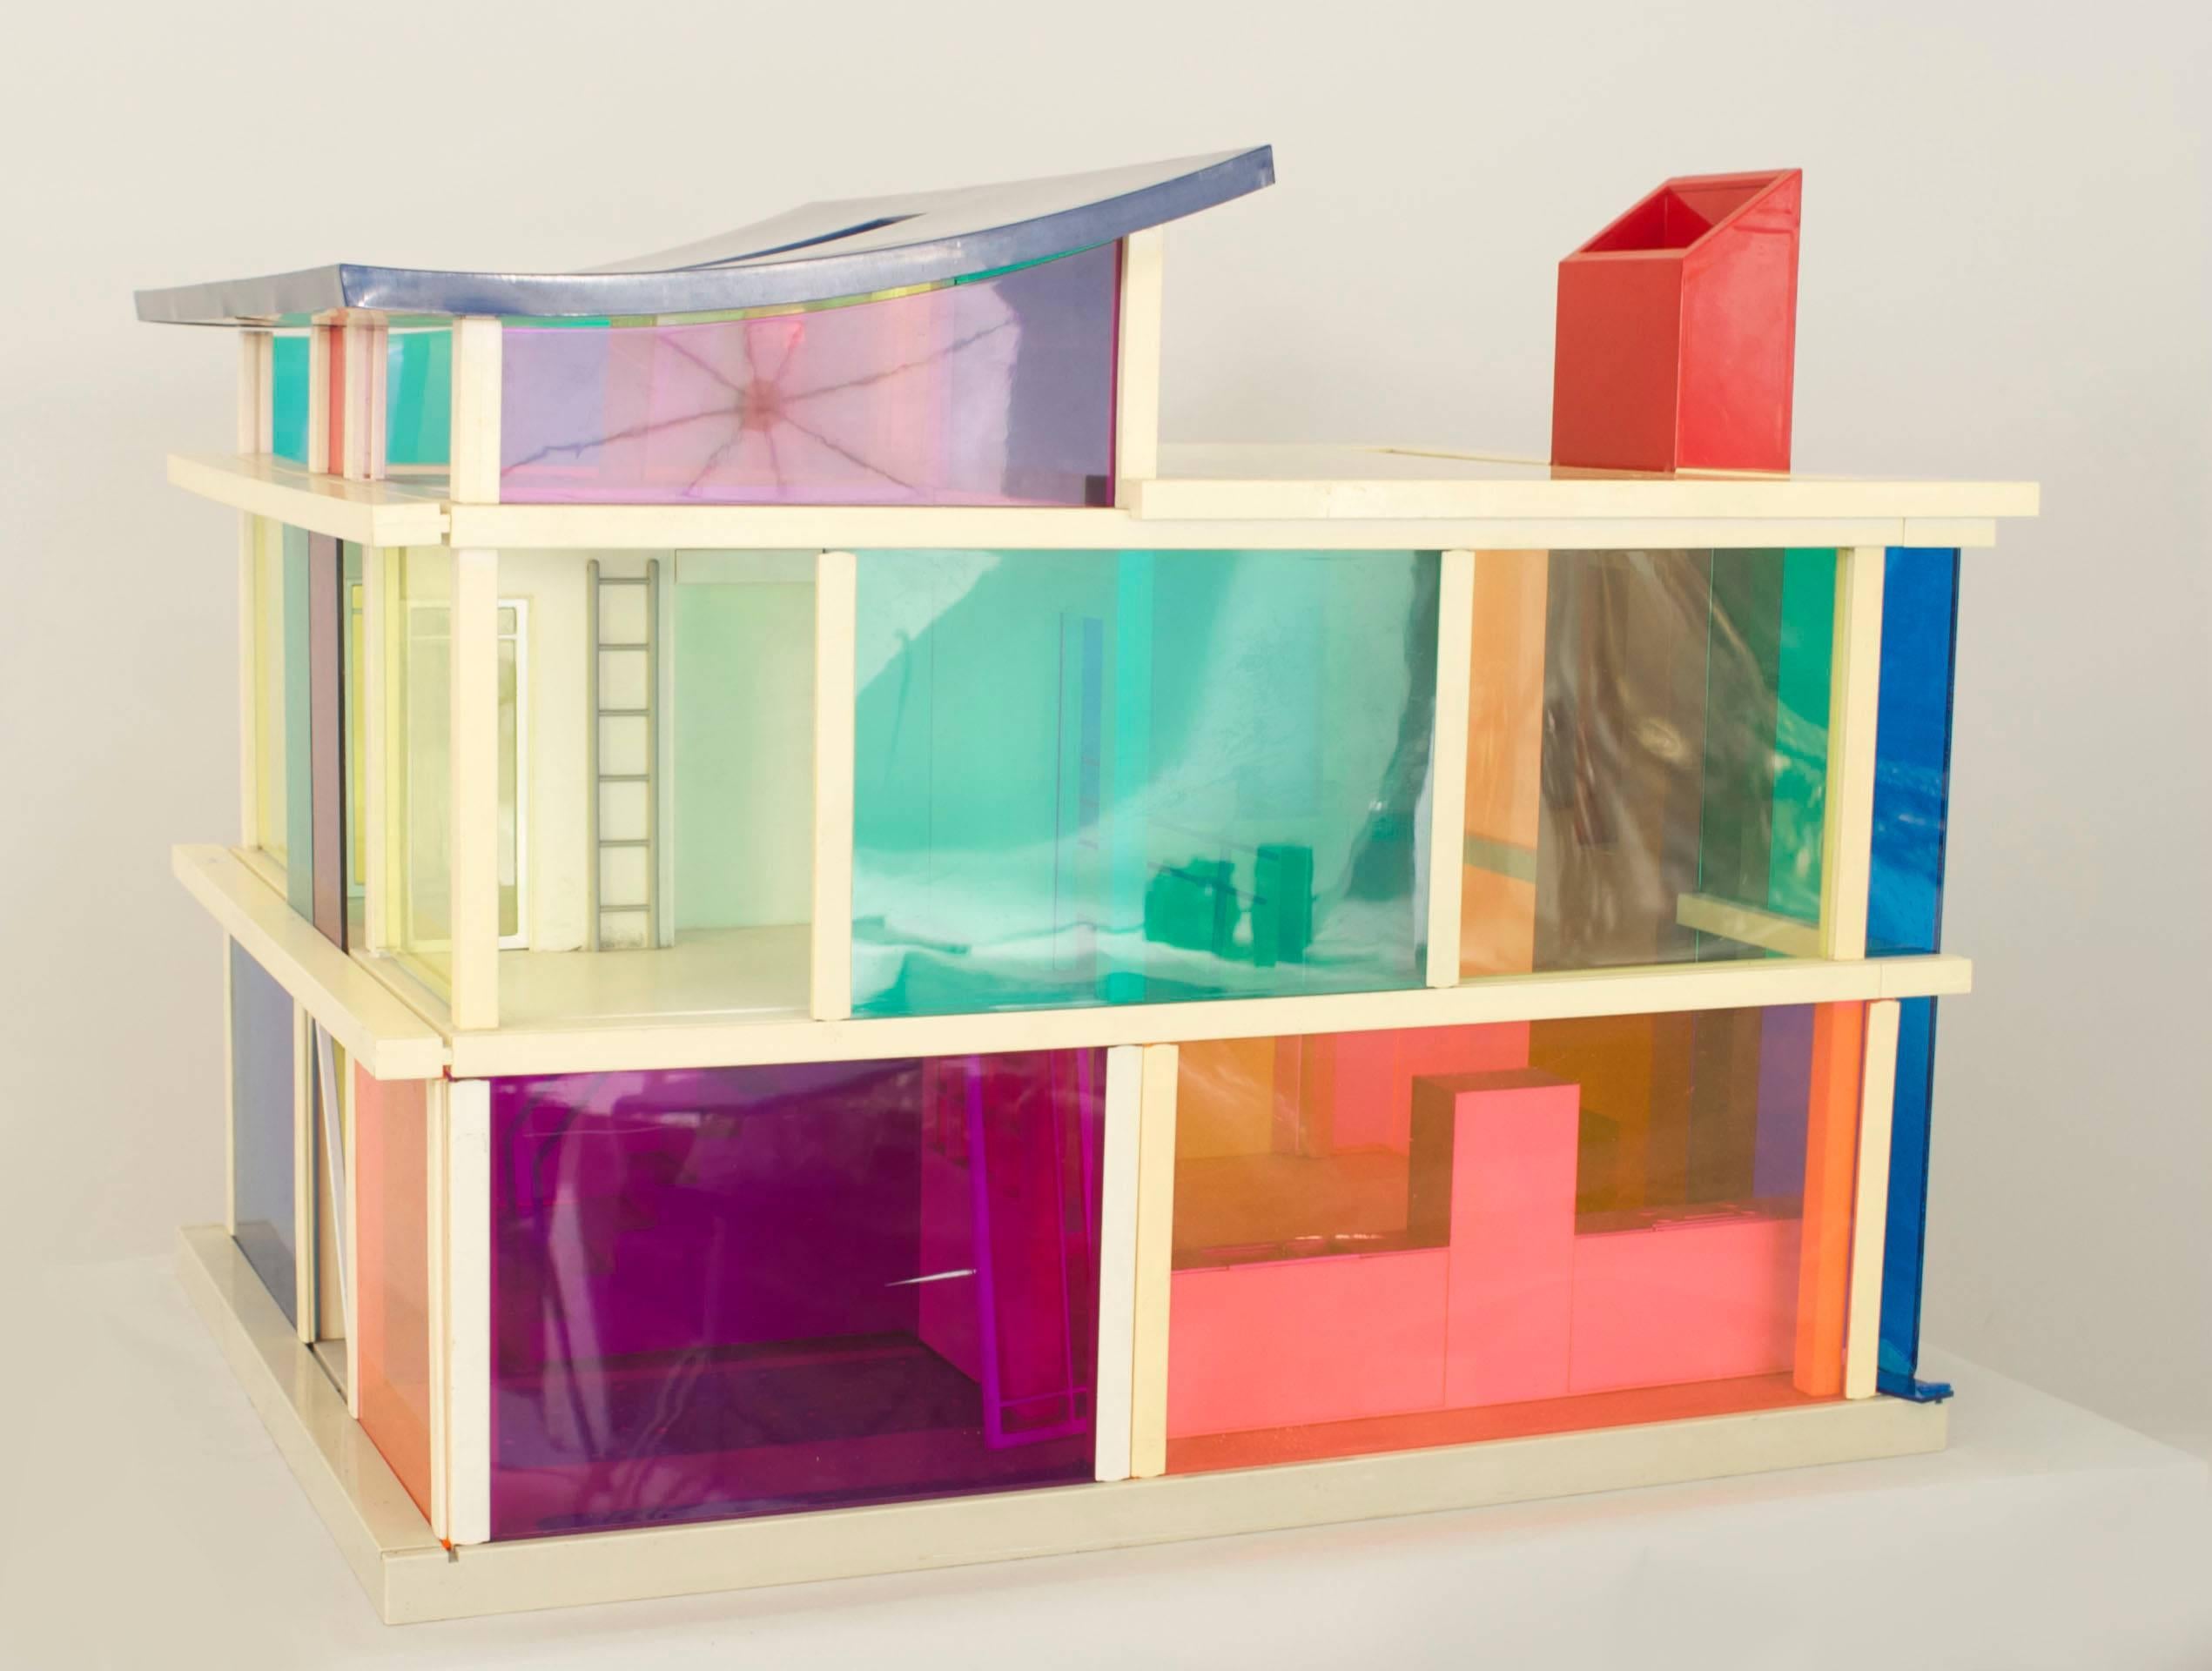 American midcentury plastic multicolored scale architectural model of a two story modern home (1960s).